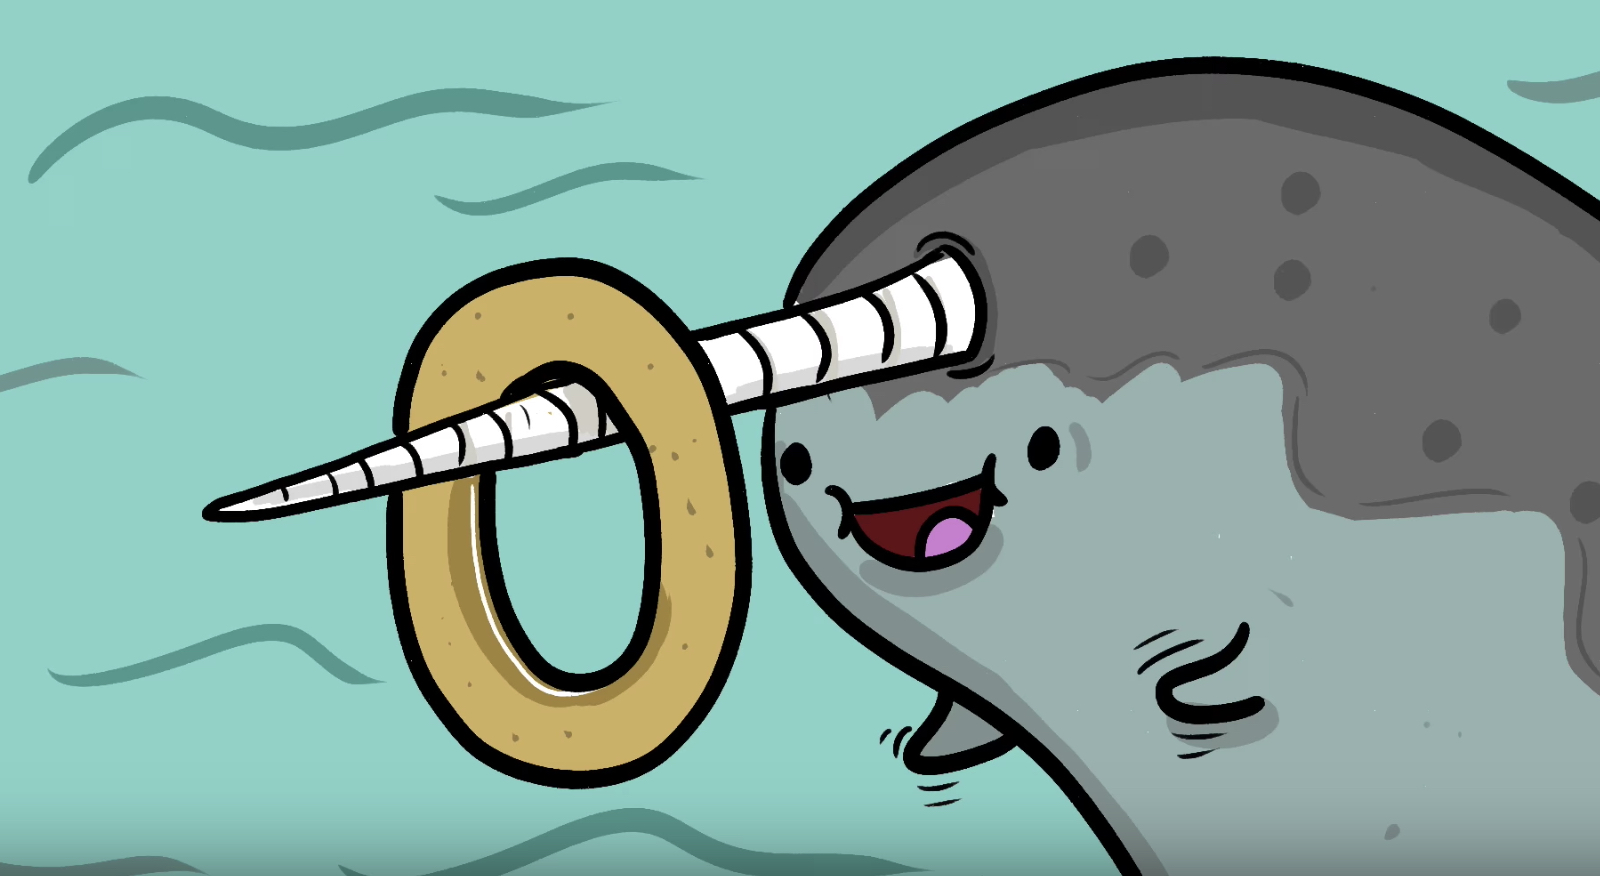 World Record Set For "Most Art Featuring A Narwhal Eating A Bagel"...